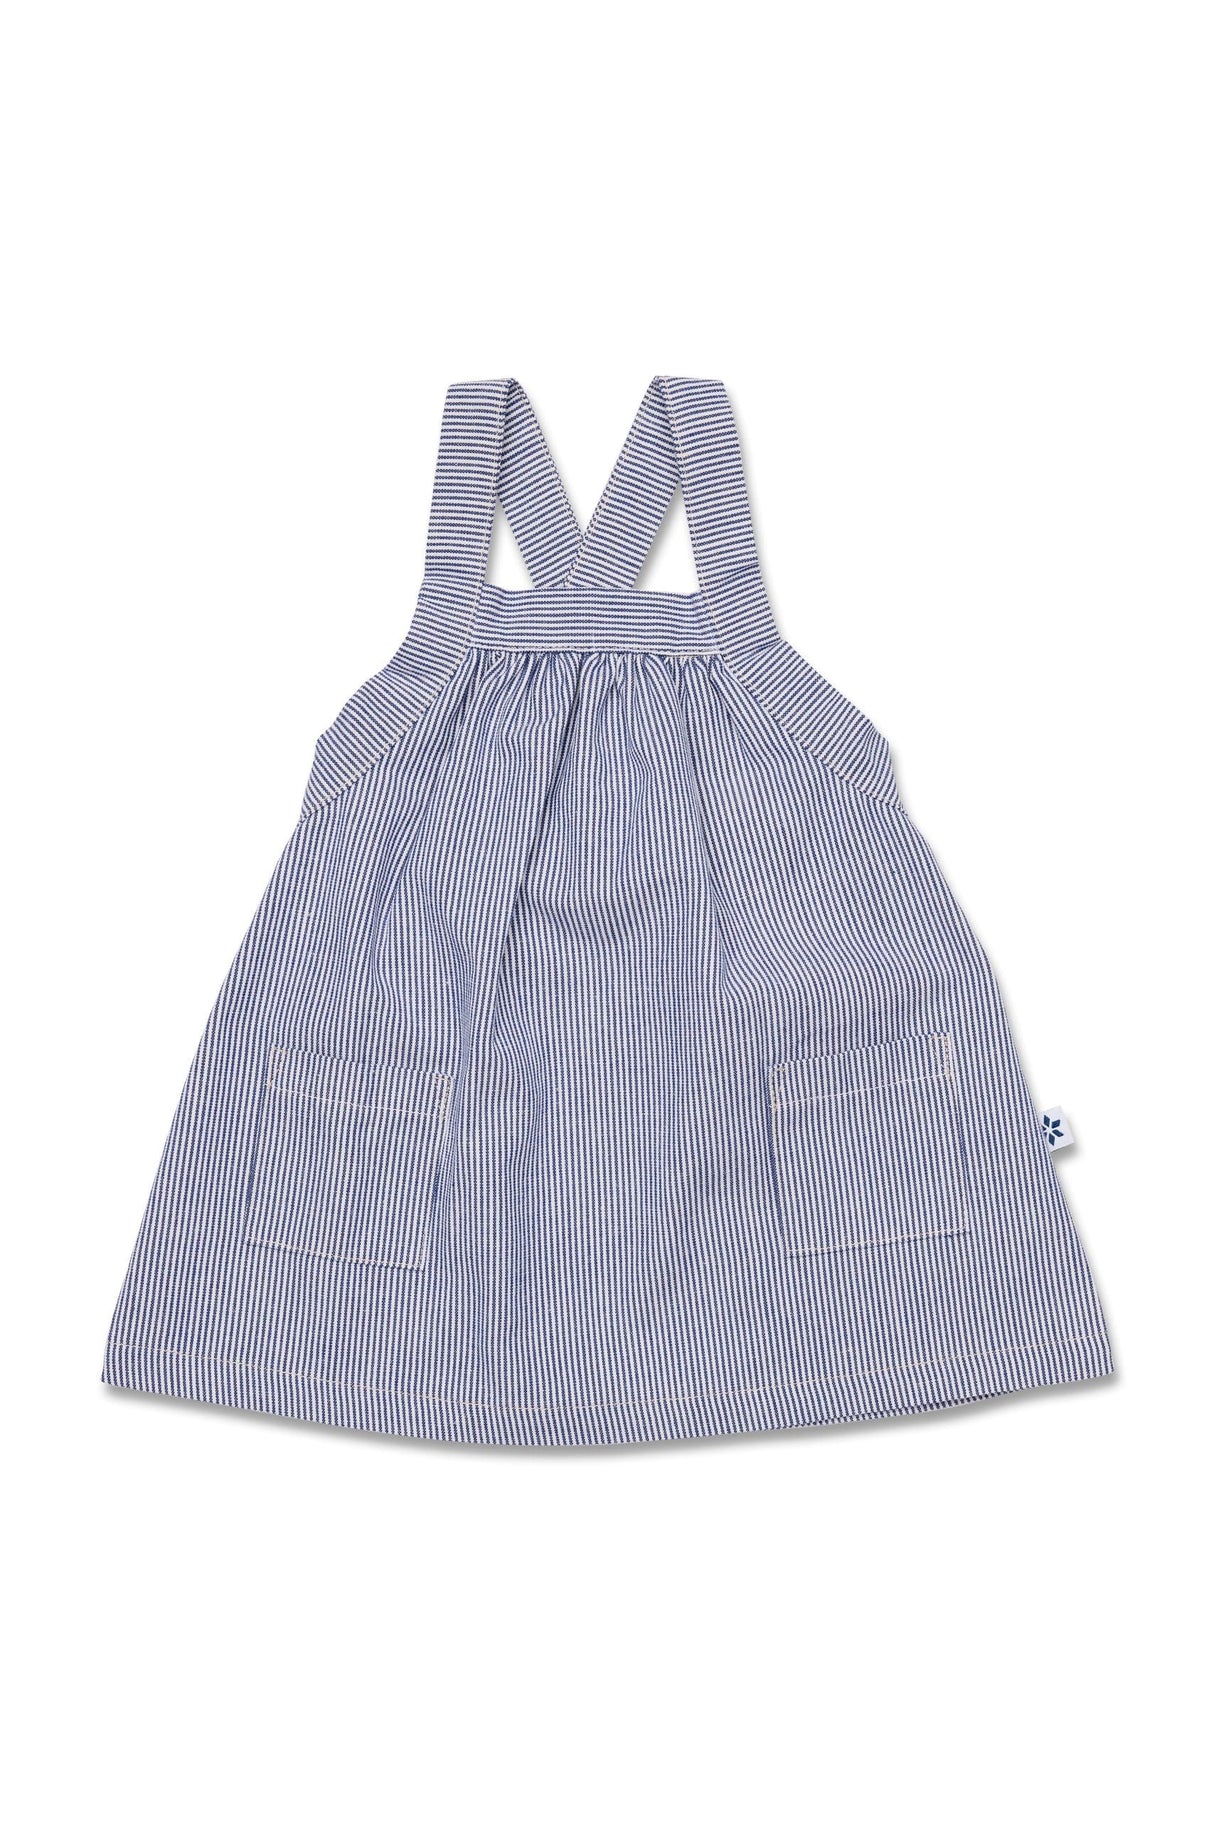 Marquise Mediterranean Dreaming Striped Pinafore